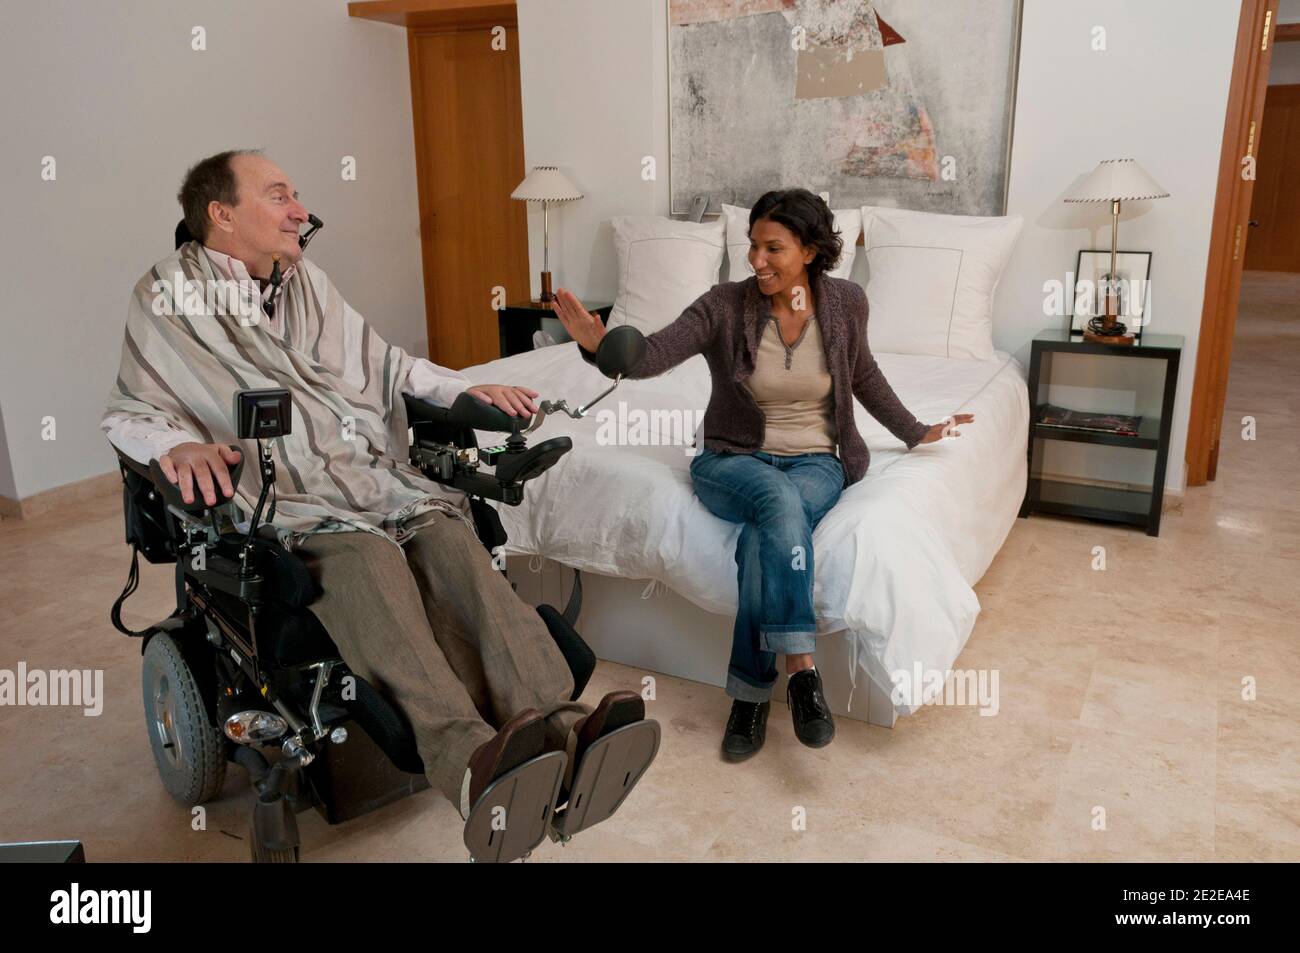 EXCLUSIVE - Philippe Pozzo di Borgo, who became quadriplegic after a paragliding accident in 1993, poses with his wife Khadija at their home in Essaouira, Morocco, November 15, 2011. His story inspired the movie 'Intouchables' directed by Olivier Nakache and Eric Toledano, released in France on November 2011, in which the actor Francois Cluzet plays his role and actor Omar Sy plays Abdel Seliou's role. In France, the movie reached 10 million of filmgoers. Photo by William Stevens/ABACAPRESS.COM Stock Photo